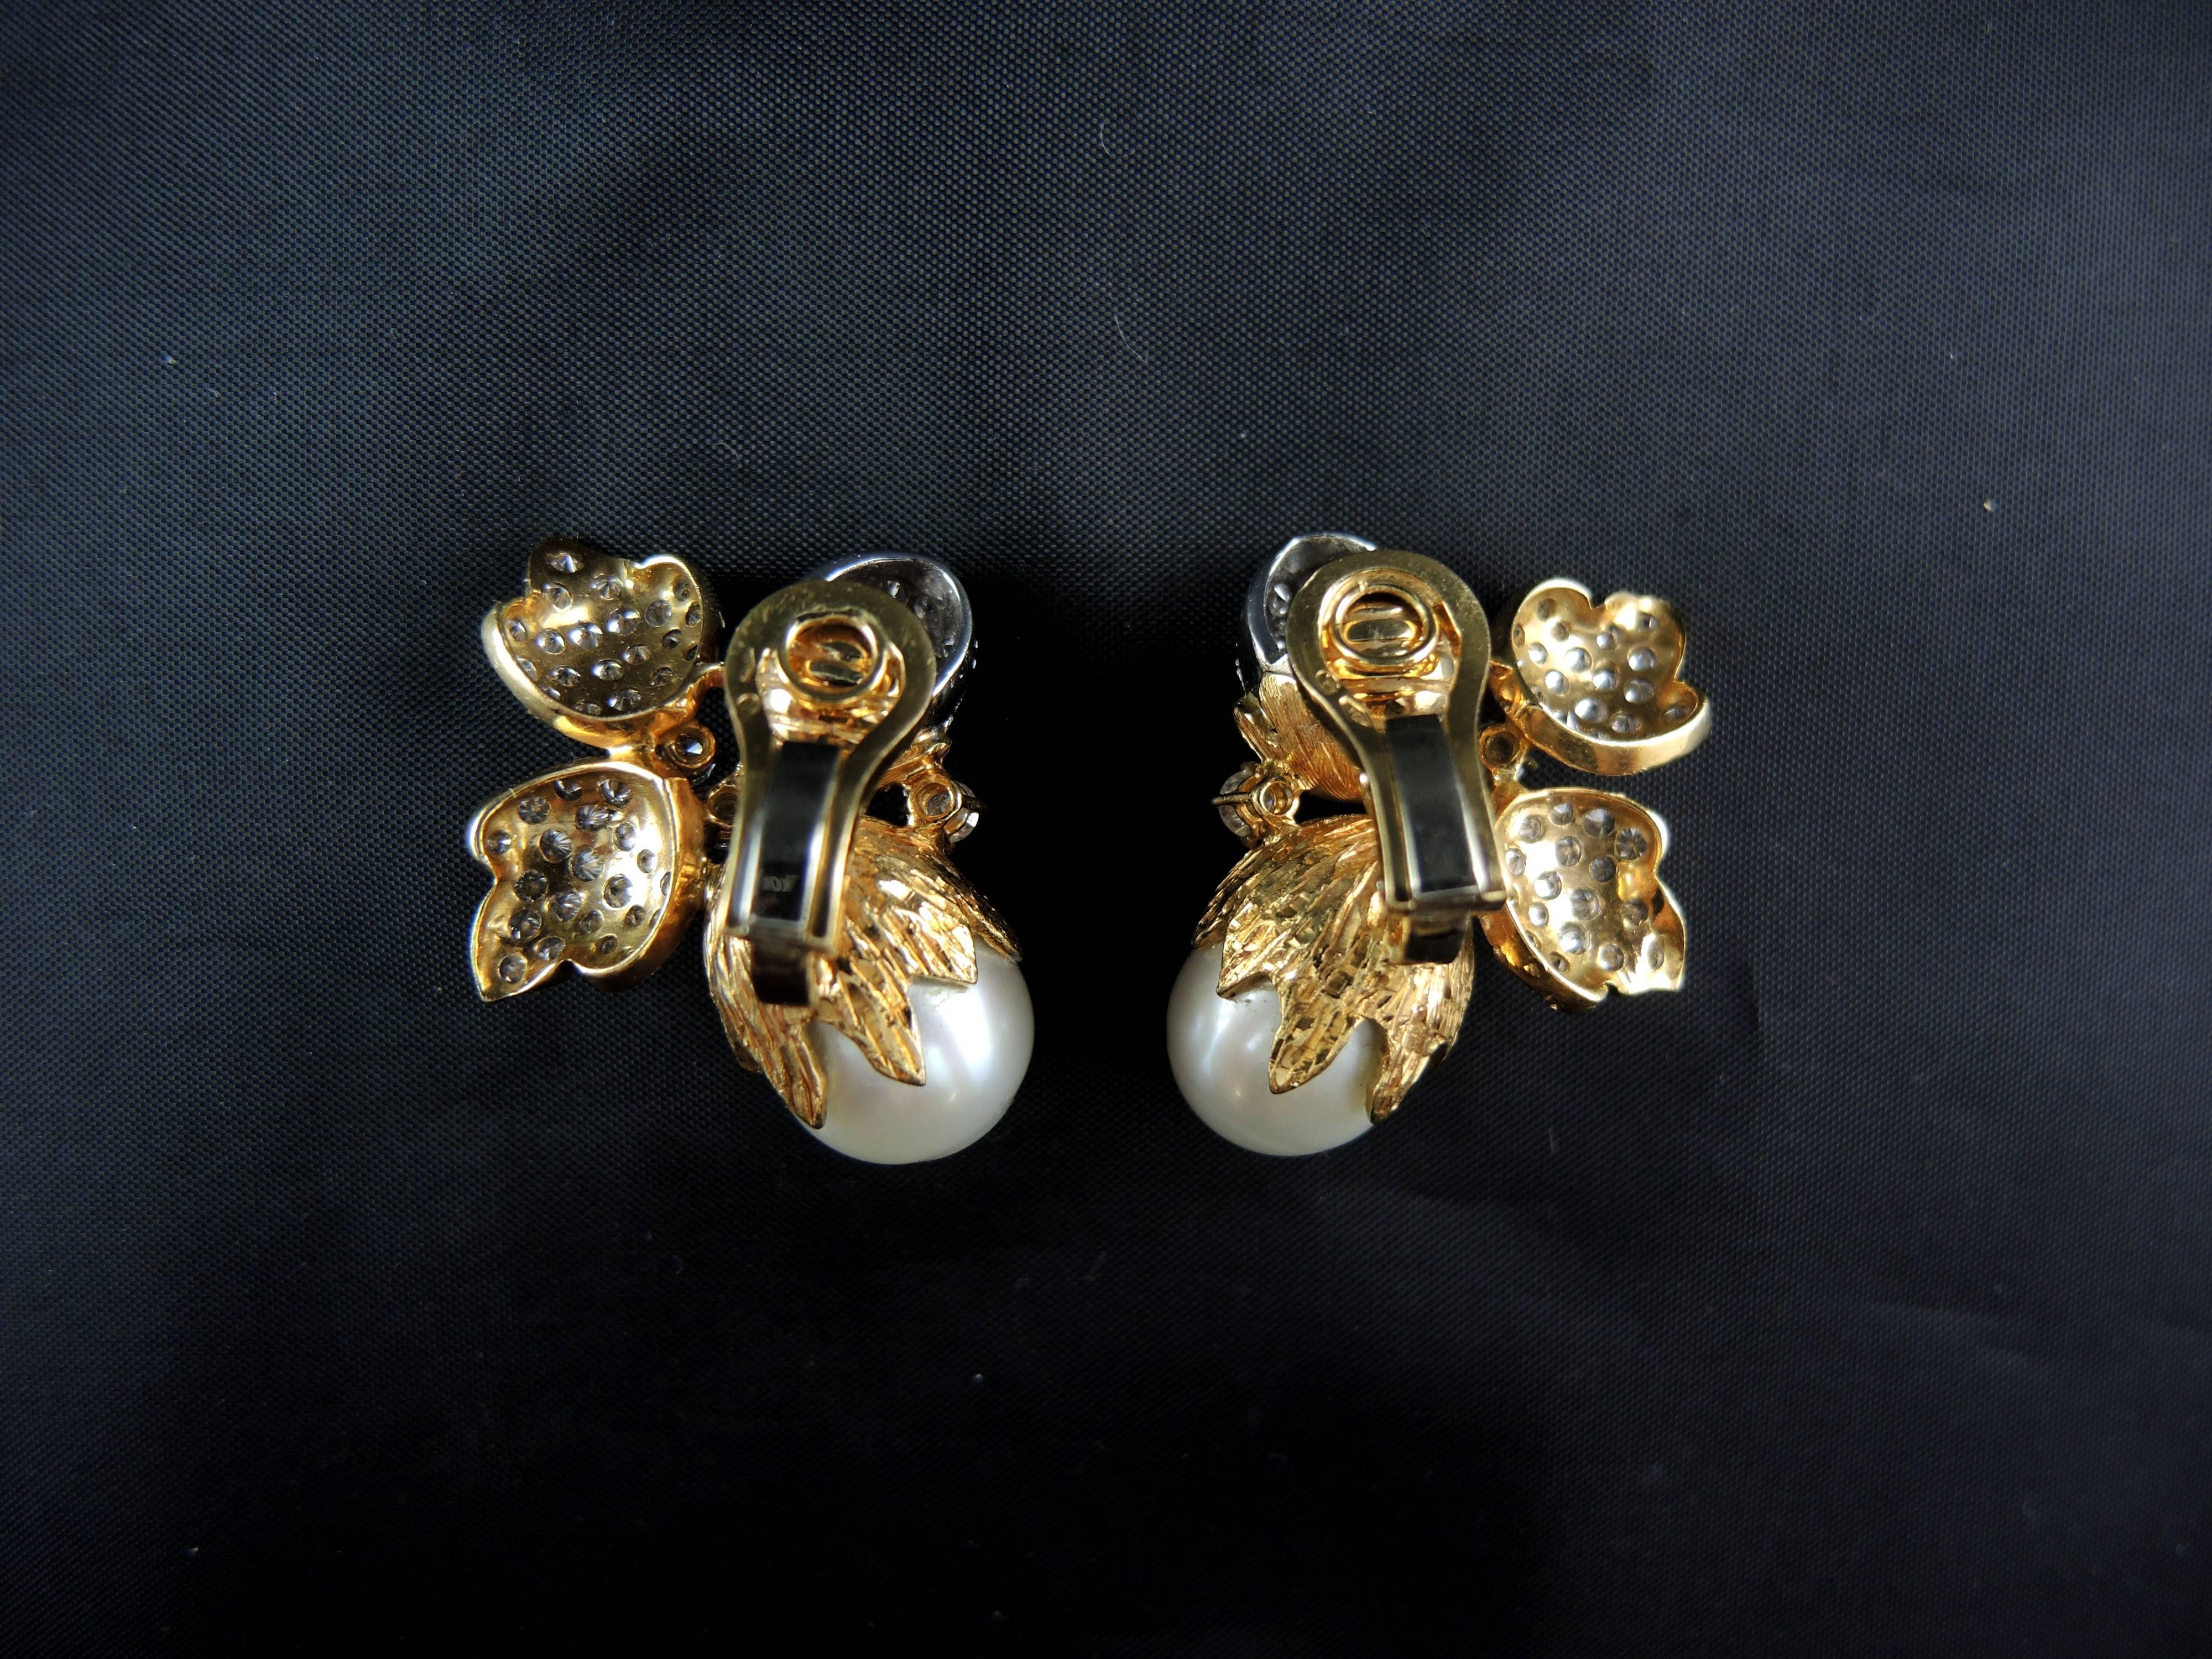 Hazelnuts' Acorns and Leaves Earrings Set with Diamonds and South Sea Pearls 1